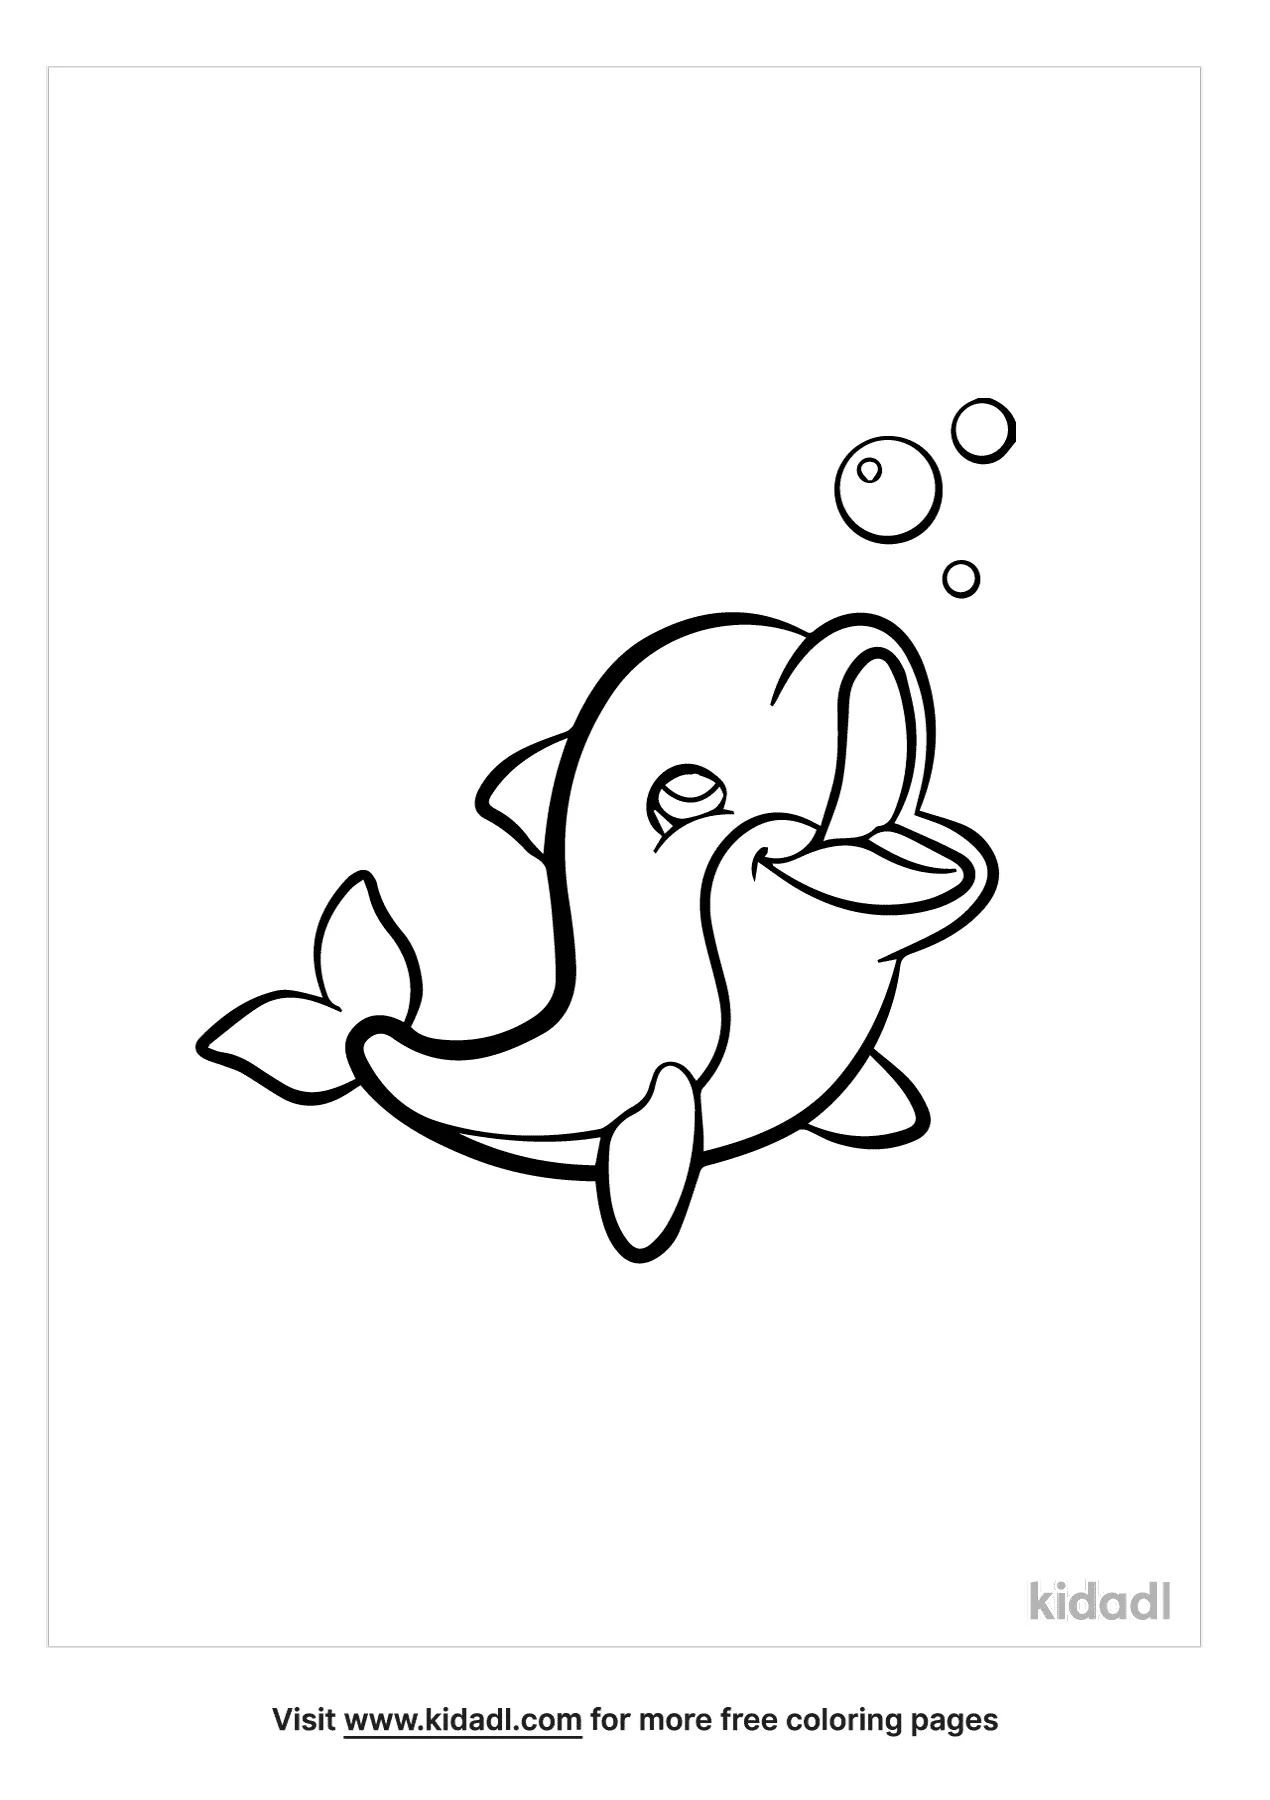 Free Cute Dolphin Cartoon Coloring Page | Coloring Page Printables | Kidadl